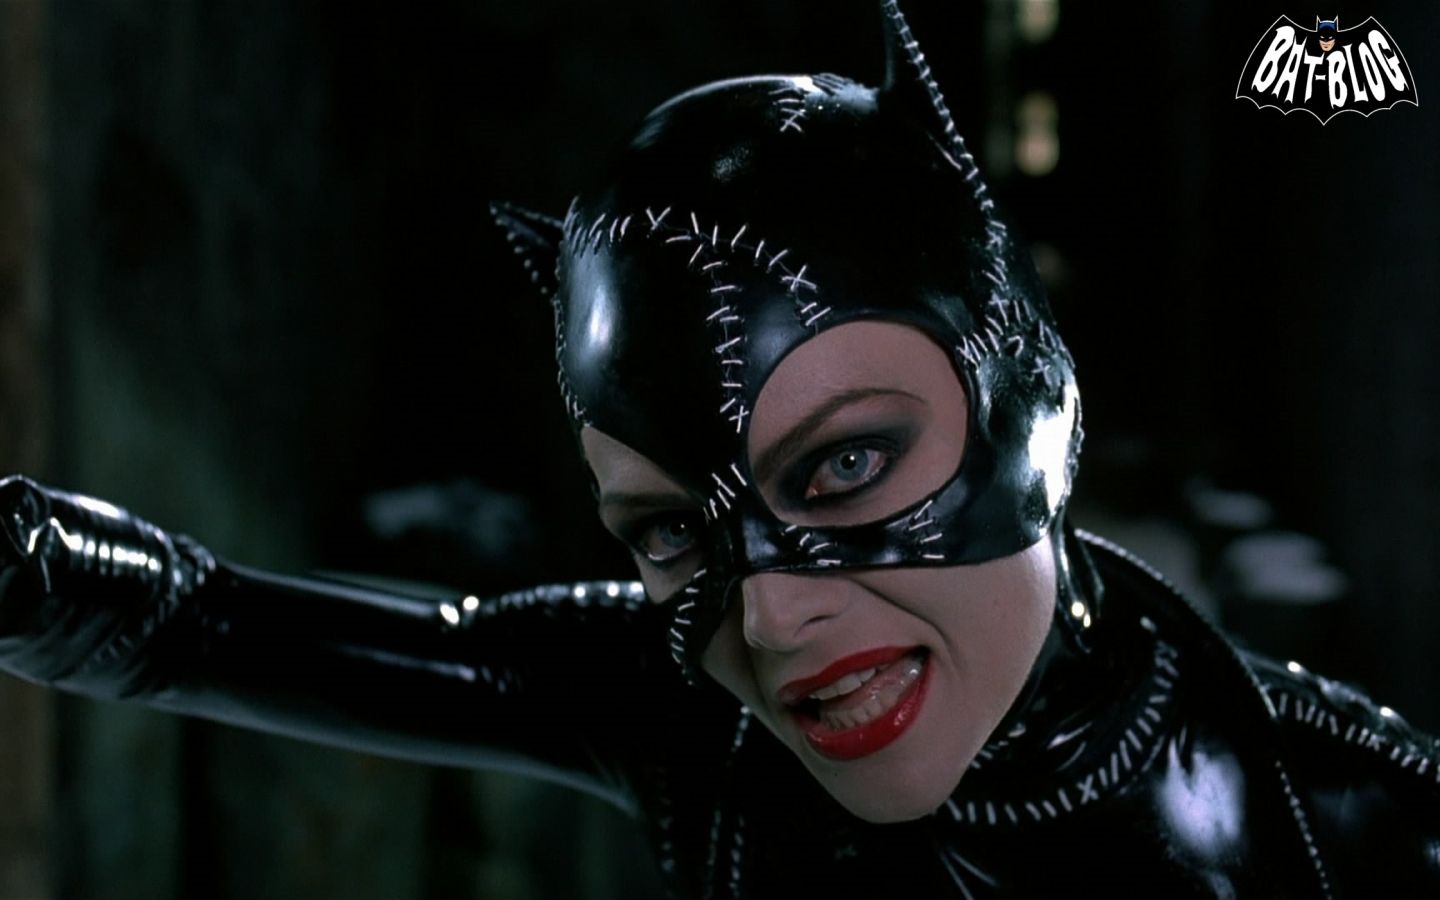 BAT, BATMAN TOYS and COLLECTIBLES: CATWOMAN WALLPAPERS